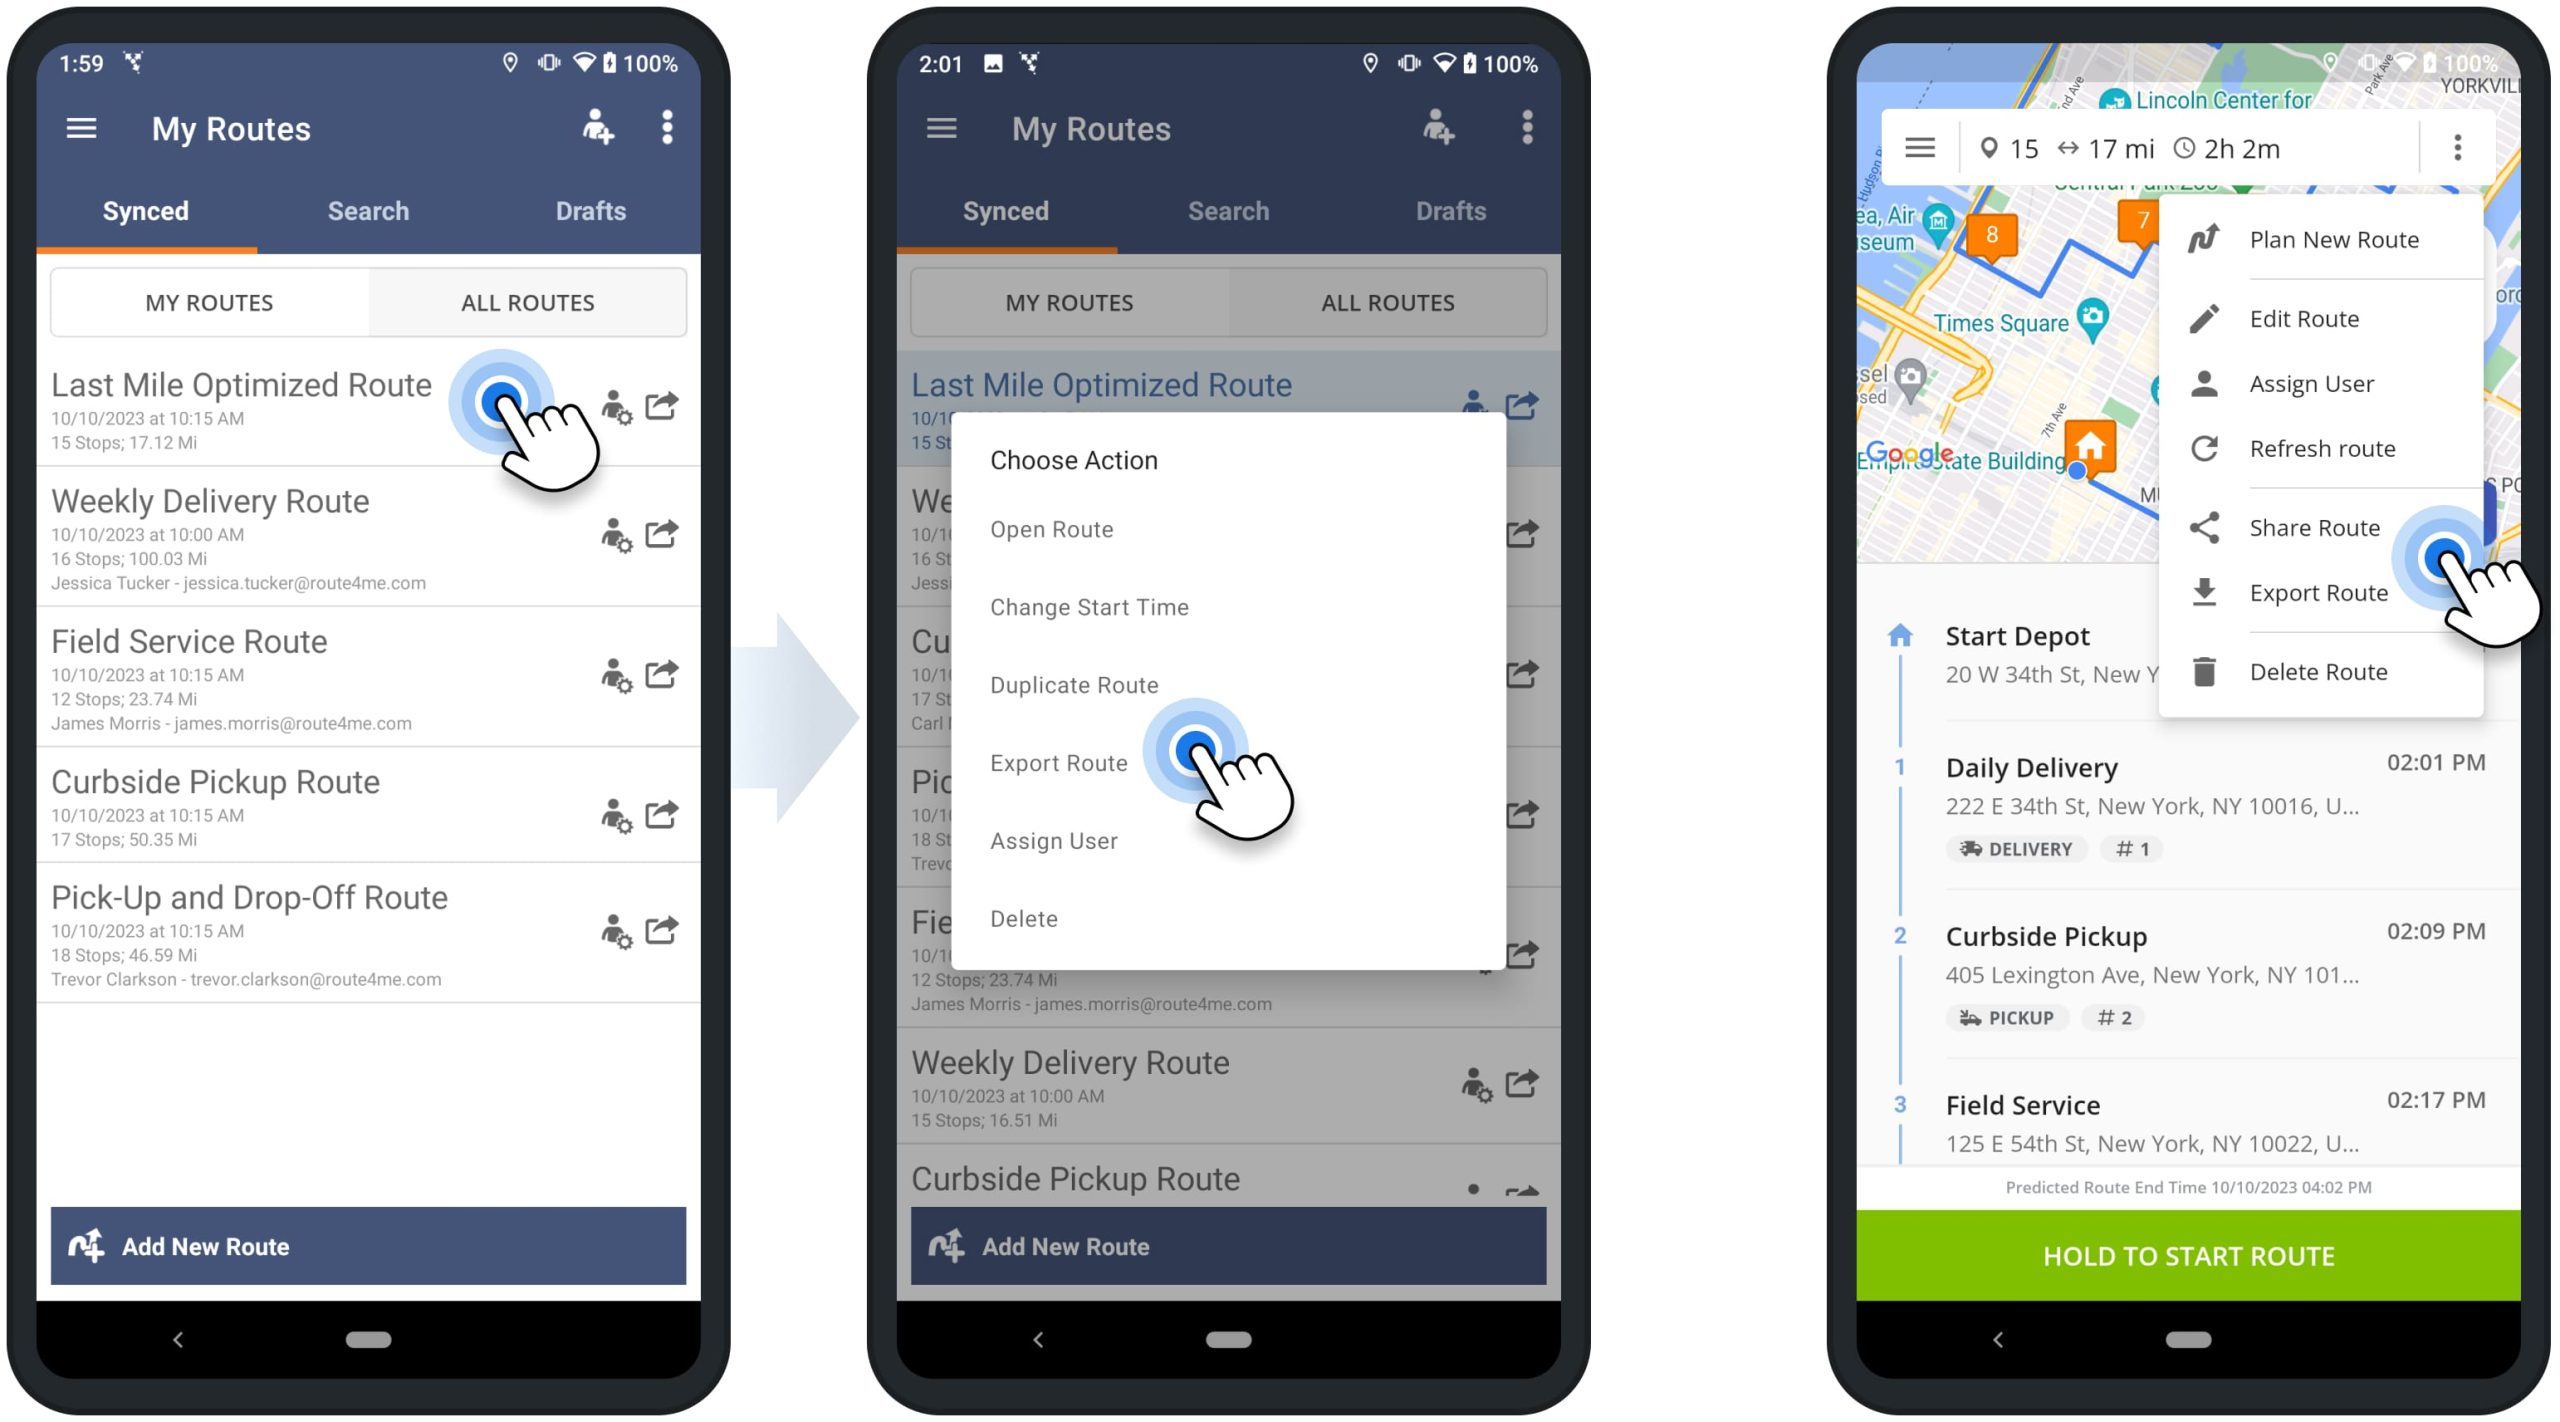 Share routes, duplicate routes, and export routes to an Android phone or tablet using Route4Me's Mobile Route Planner app.